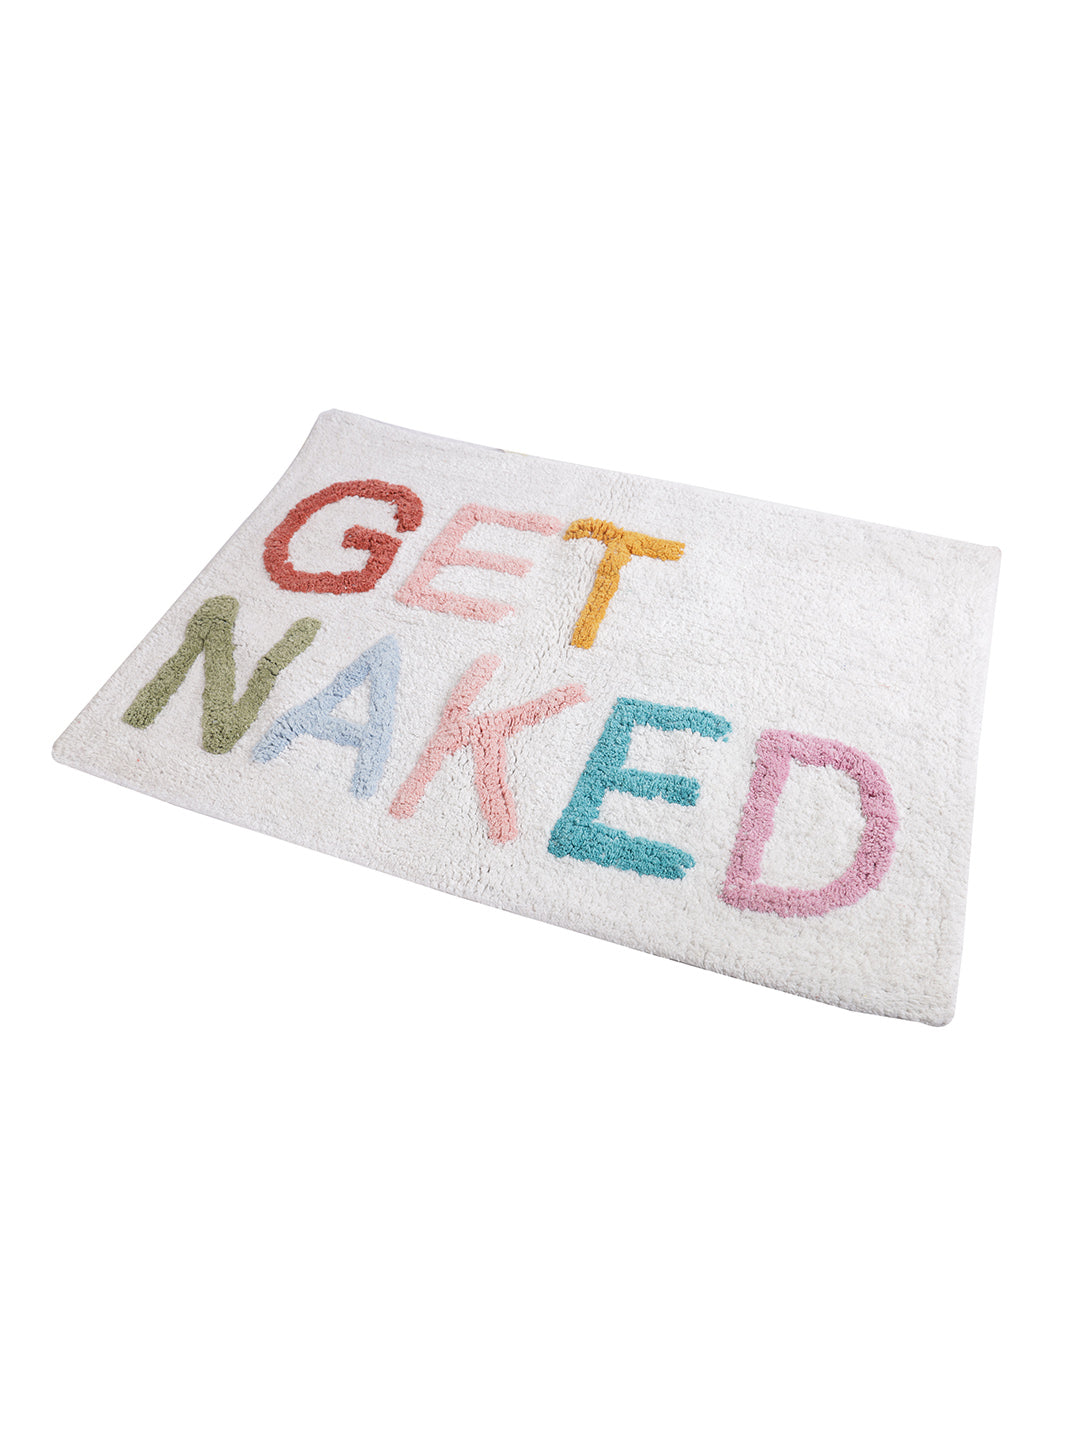 Get Naked Multi Colored Tufted Cotton Bath Mat